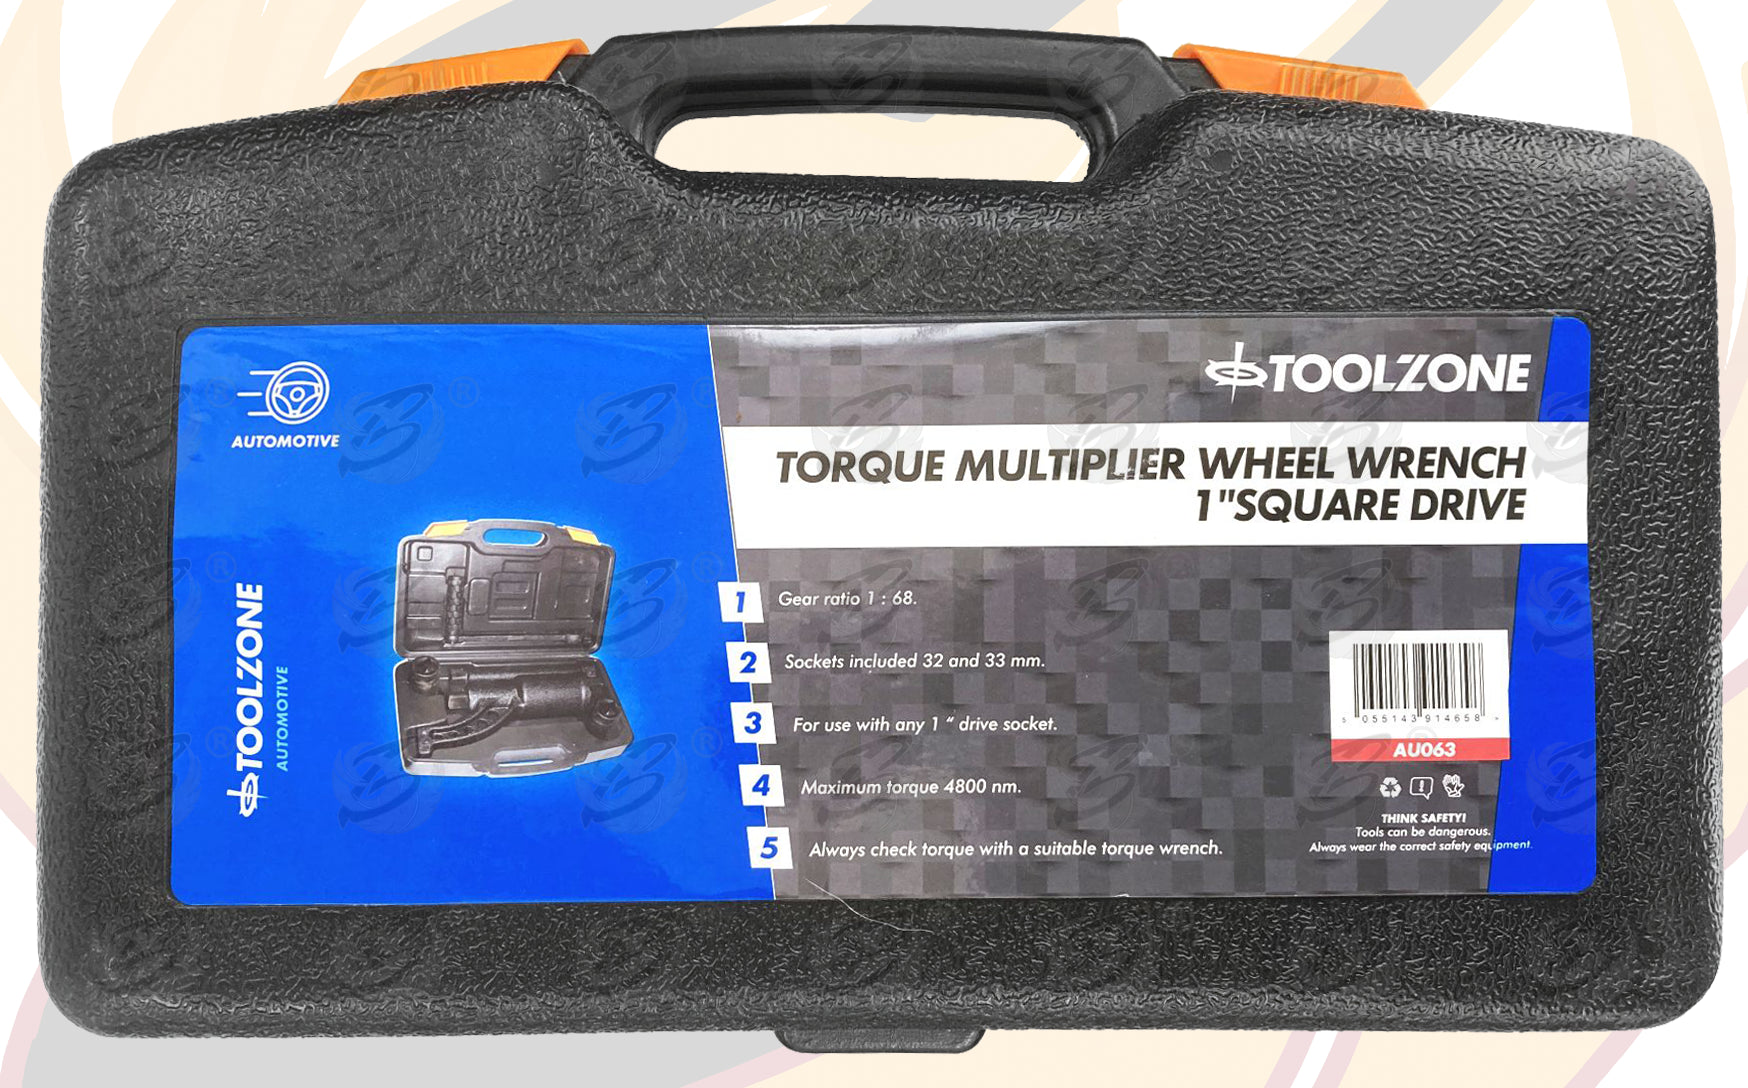 TOOLZONE 1" DRIVE TORQUE MULTIPLIER 1:68 RATIO UP TO 4800Nm ( 32MM & 33MM SOCKET INCLUDED )